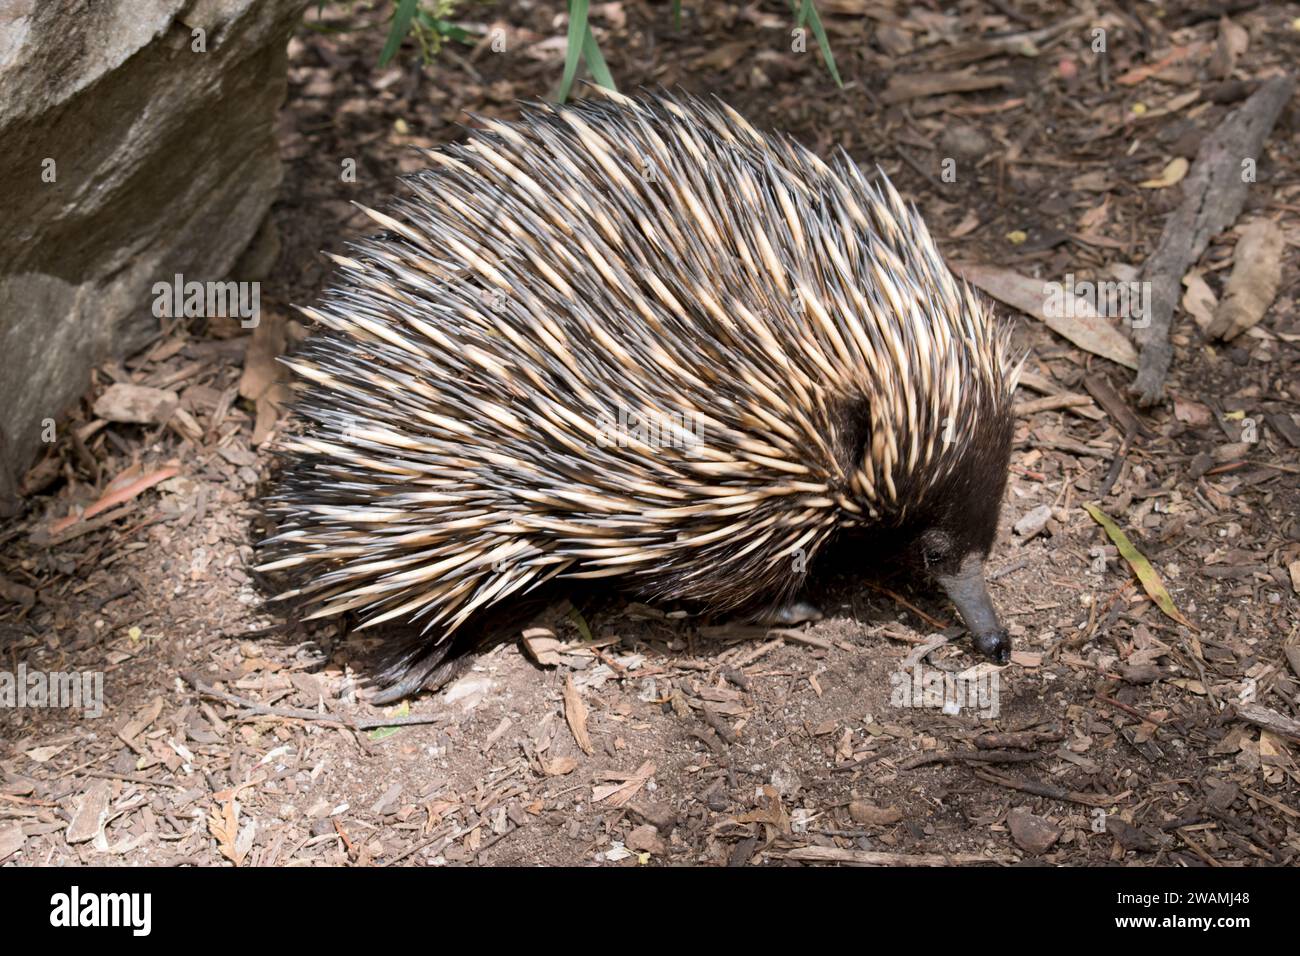 The echidna has spines like a porcupine, a beak like a bird, a pouch like a kangaroo, and lays eggs like a reptile. Also known as spiny anteaters, the Stock Photo